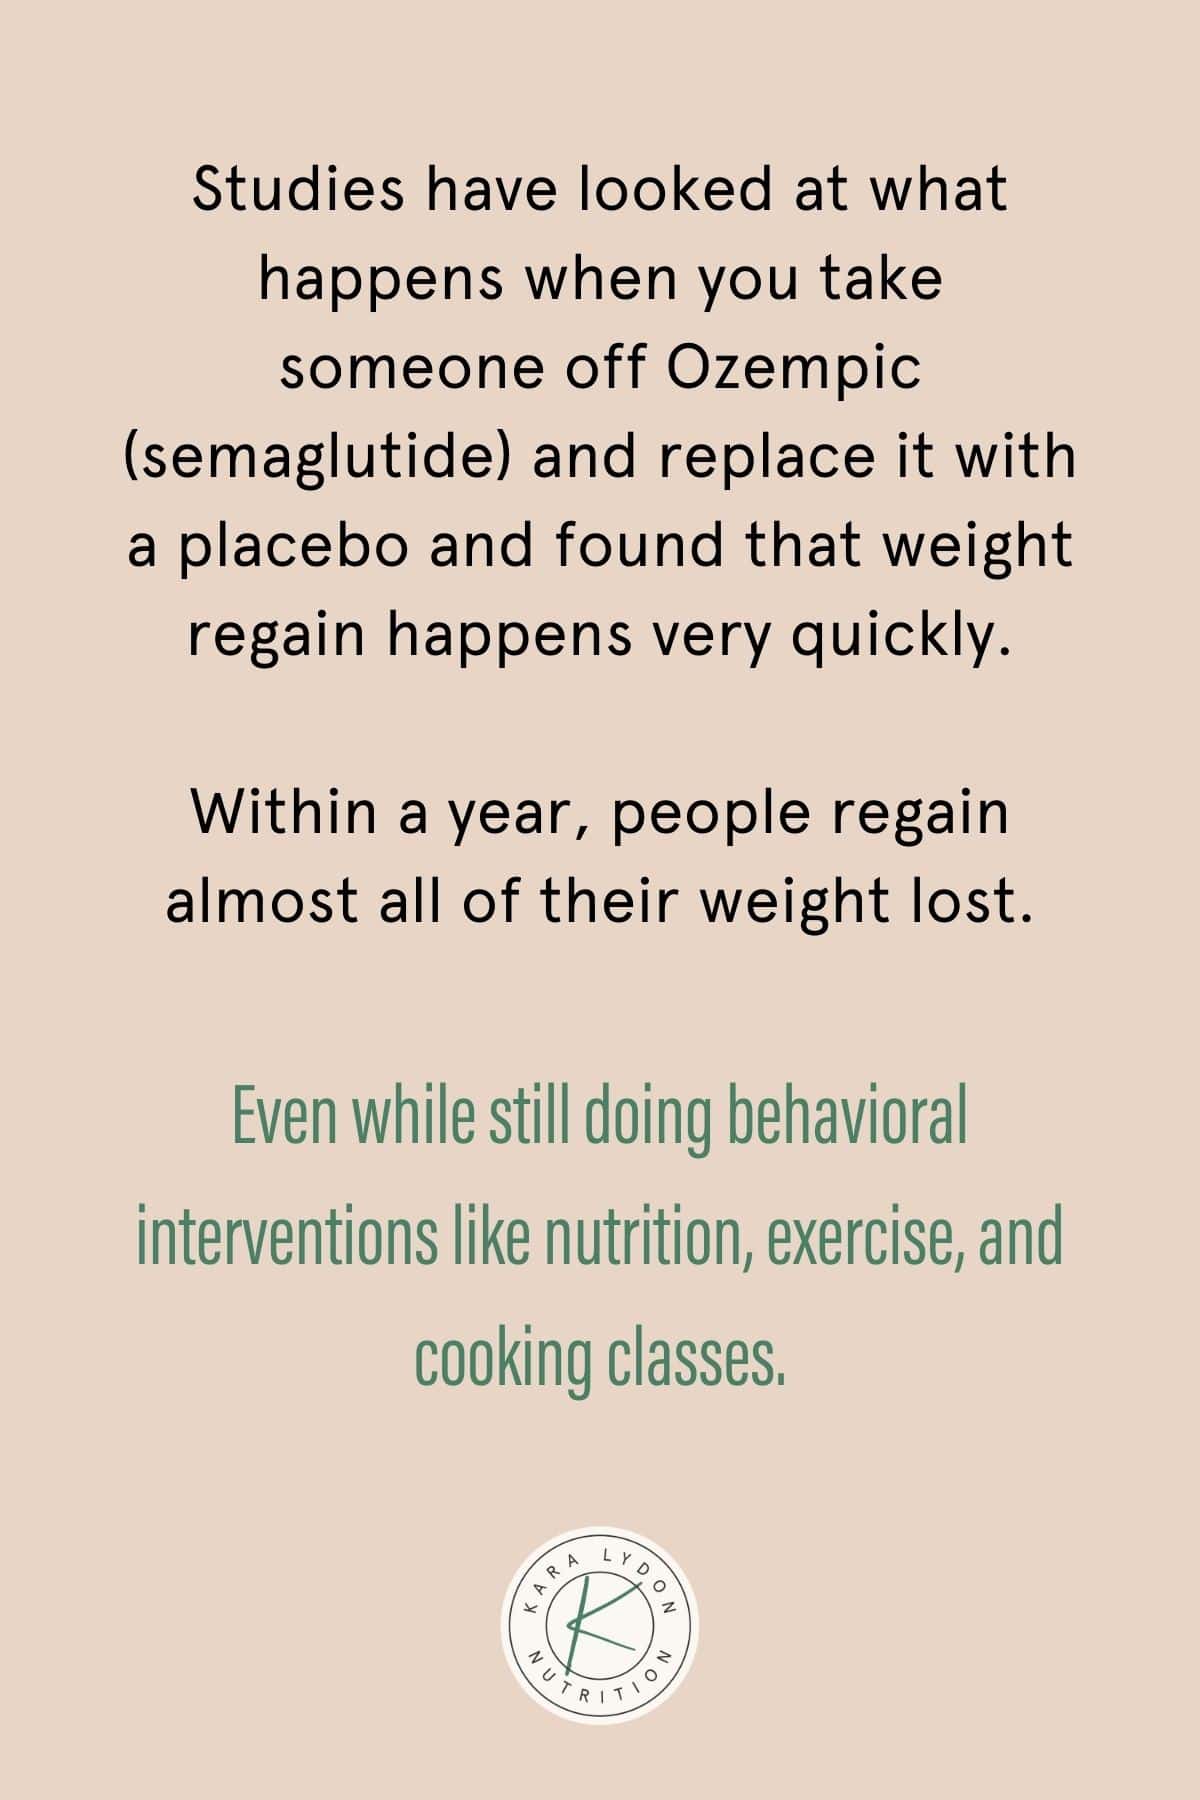 Graphic with quote: "Studies have looked at what happens when you take someone off Ozempic (semaglutide) and replace it with a placebo and found that weight regain happens very quickly. Within a year, people regain almost all of their lost weight. Even while still doing behavioral interventions like nutrition, exercise, and cooking classes."